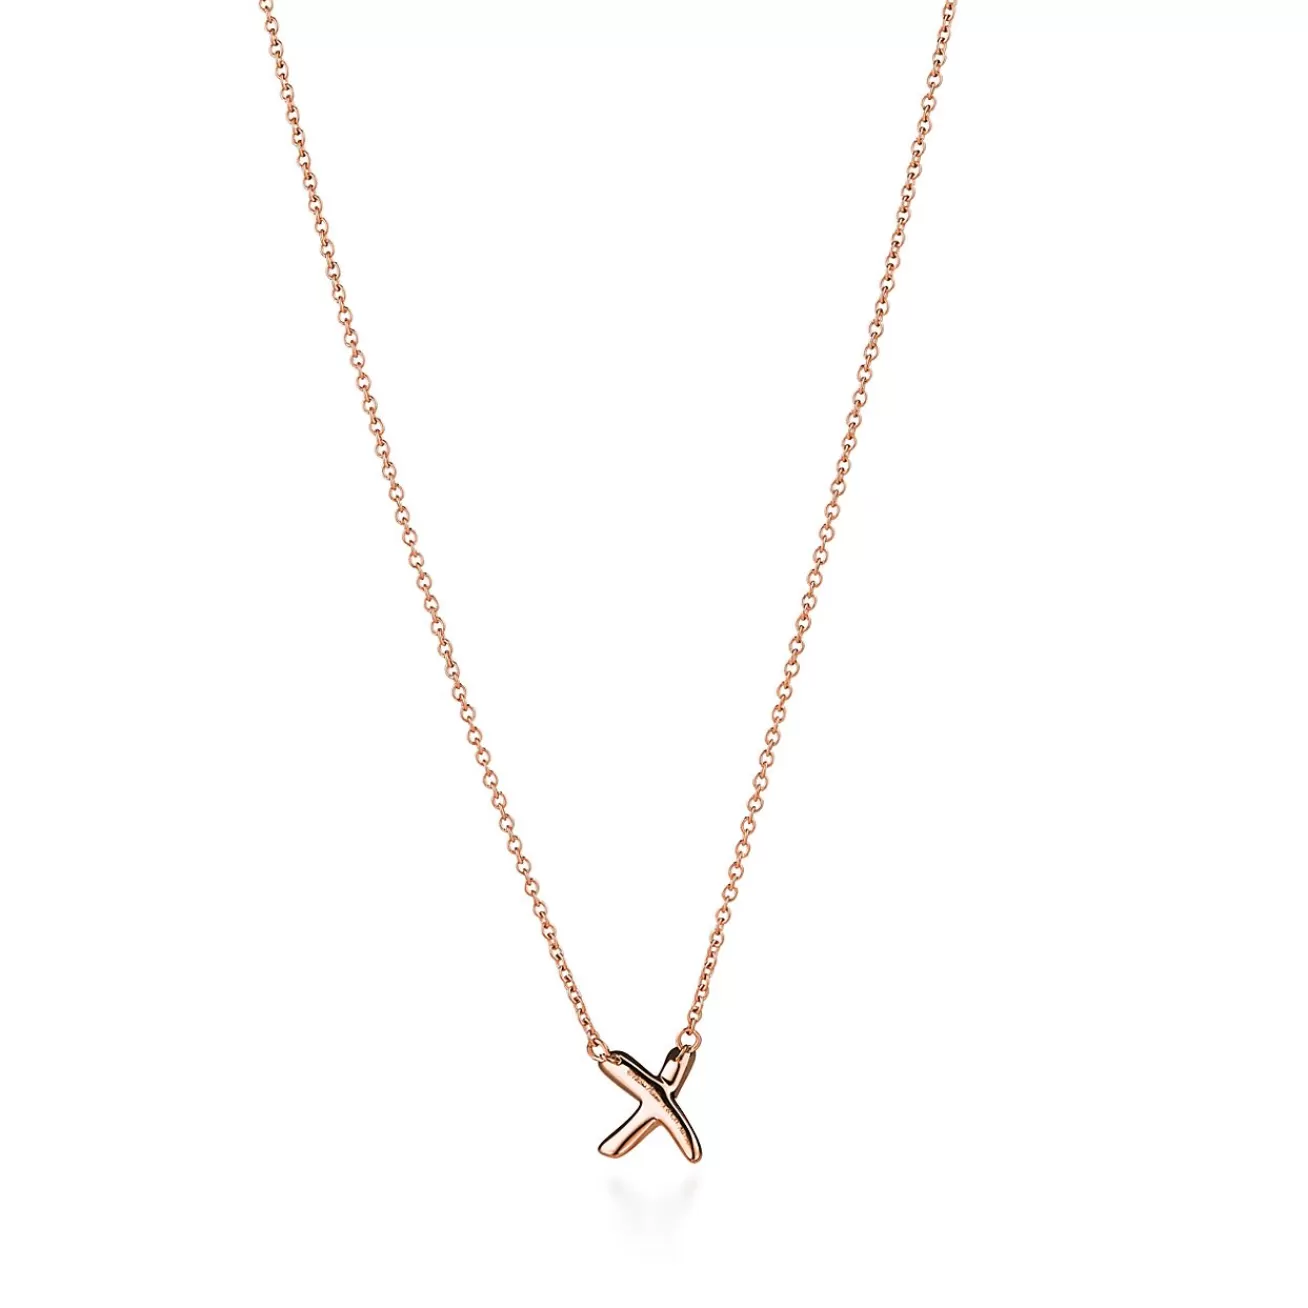 Tiffany & Co. Paloma's Graffiti X pendant in 18k rose gold, small. | ^ Necklaces & Pendants | Rose Gold Jewelry